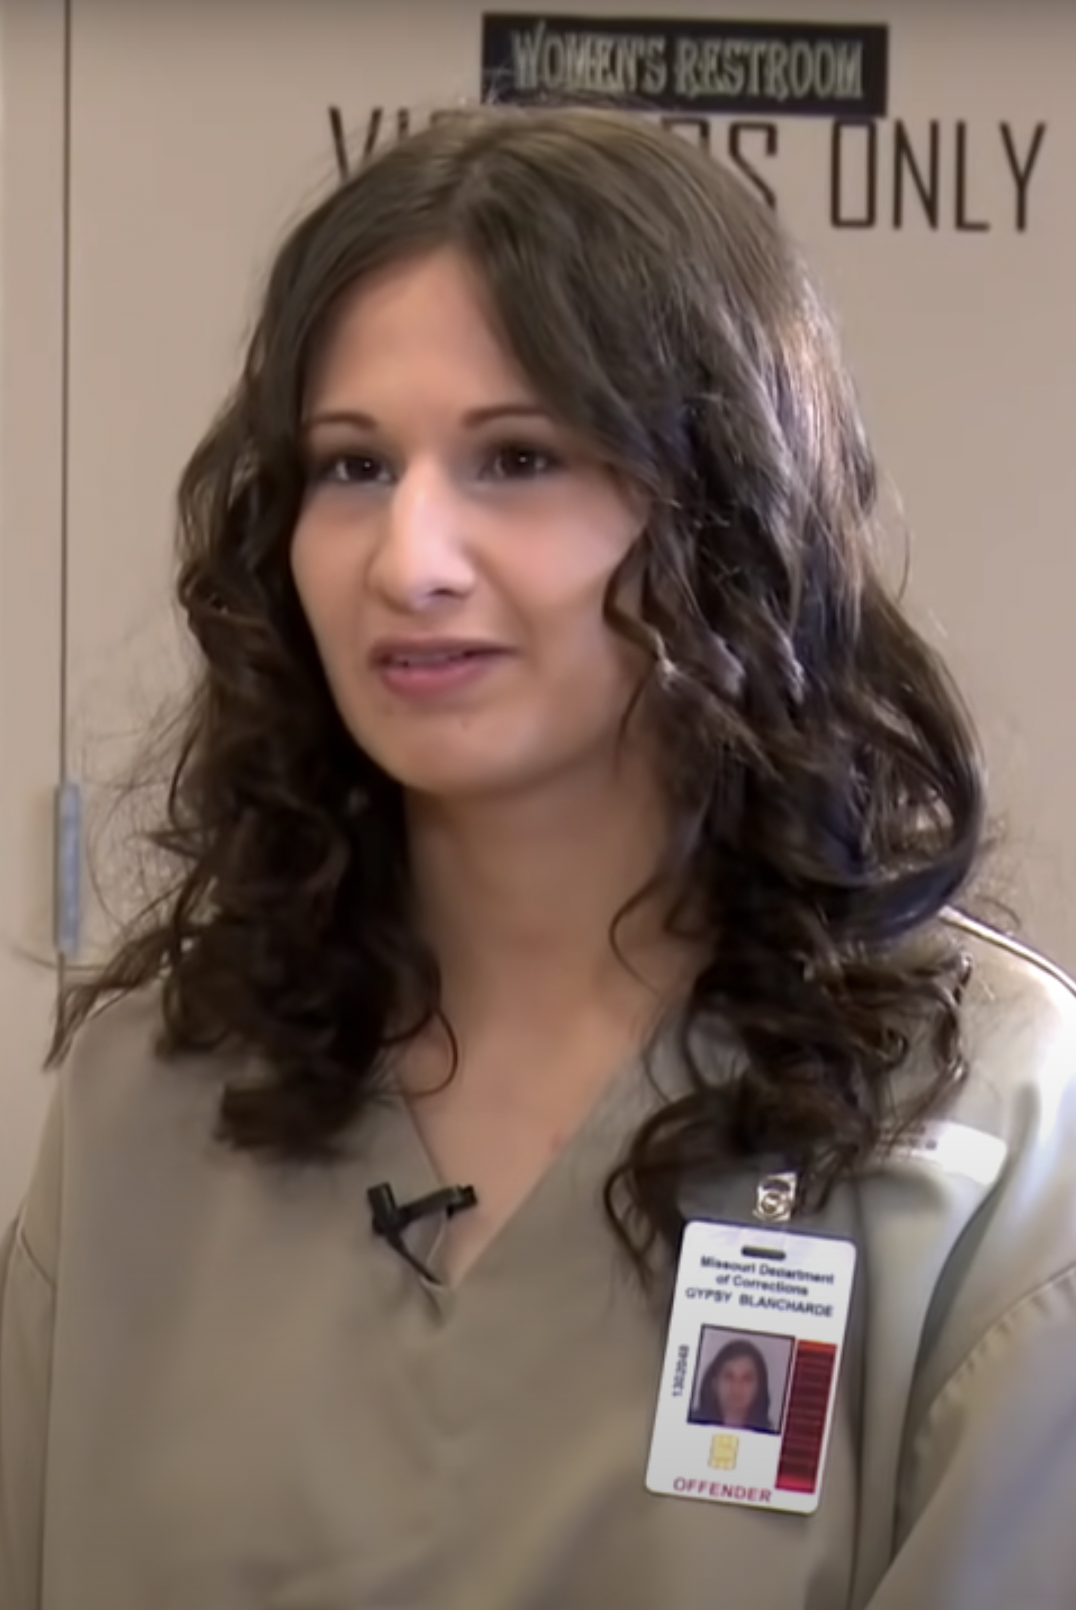 Gypsy Rose Blanchard during an interview, dated 21 November 2017 | Source: Youtube.com/drphil